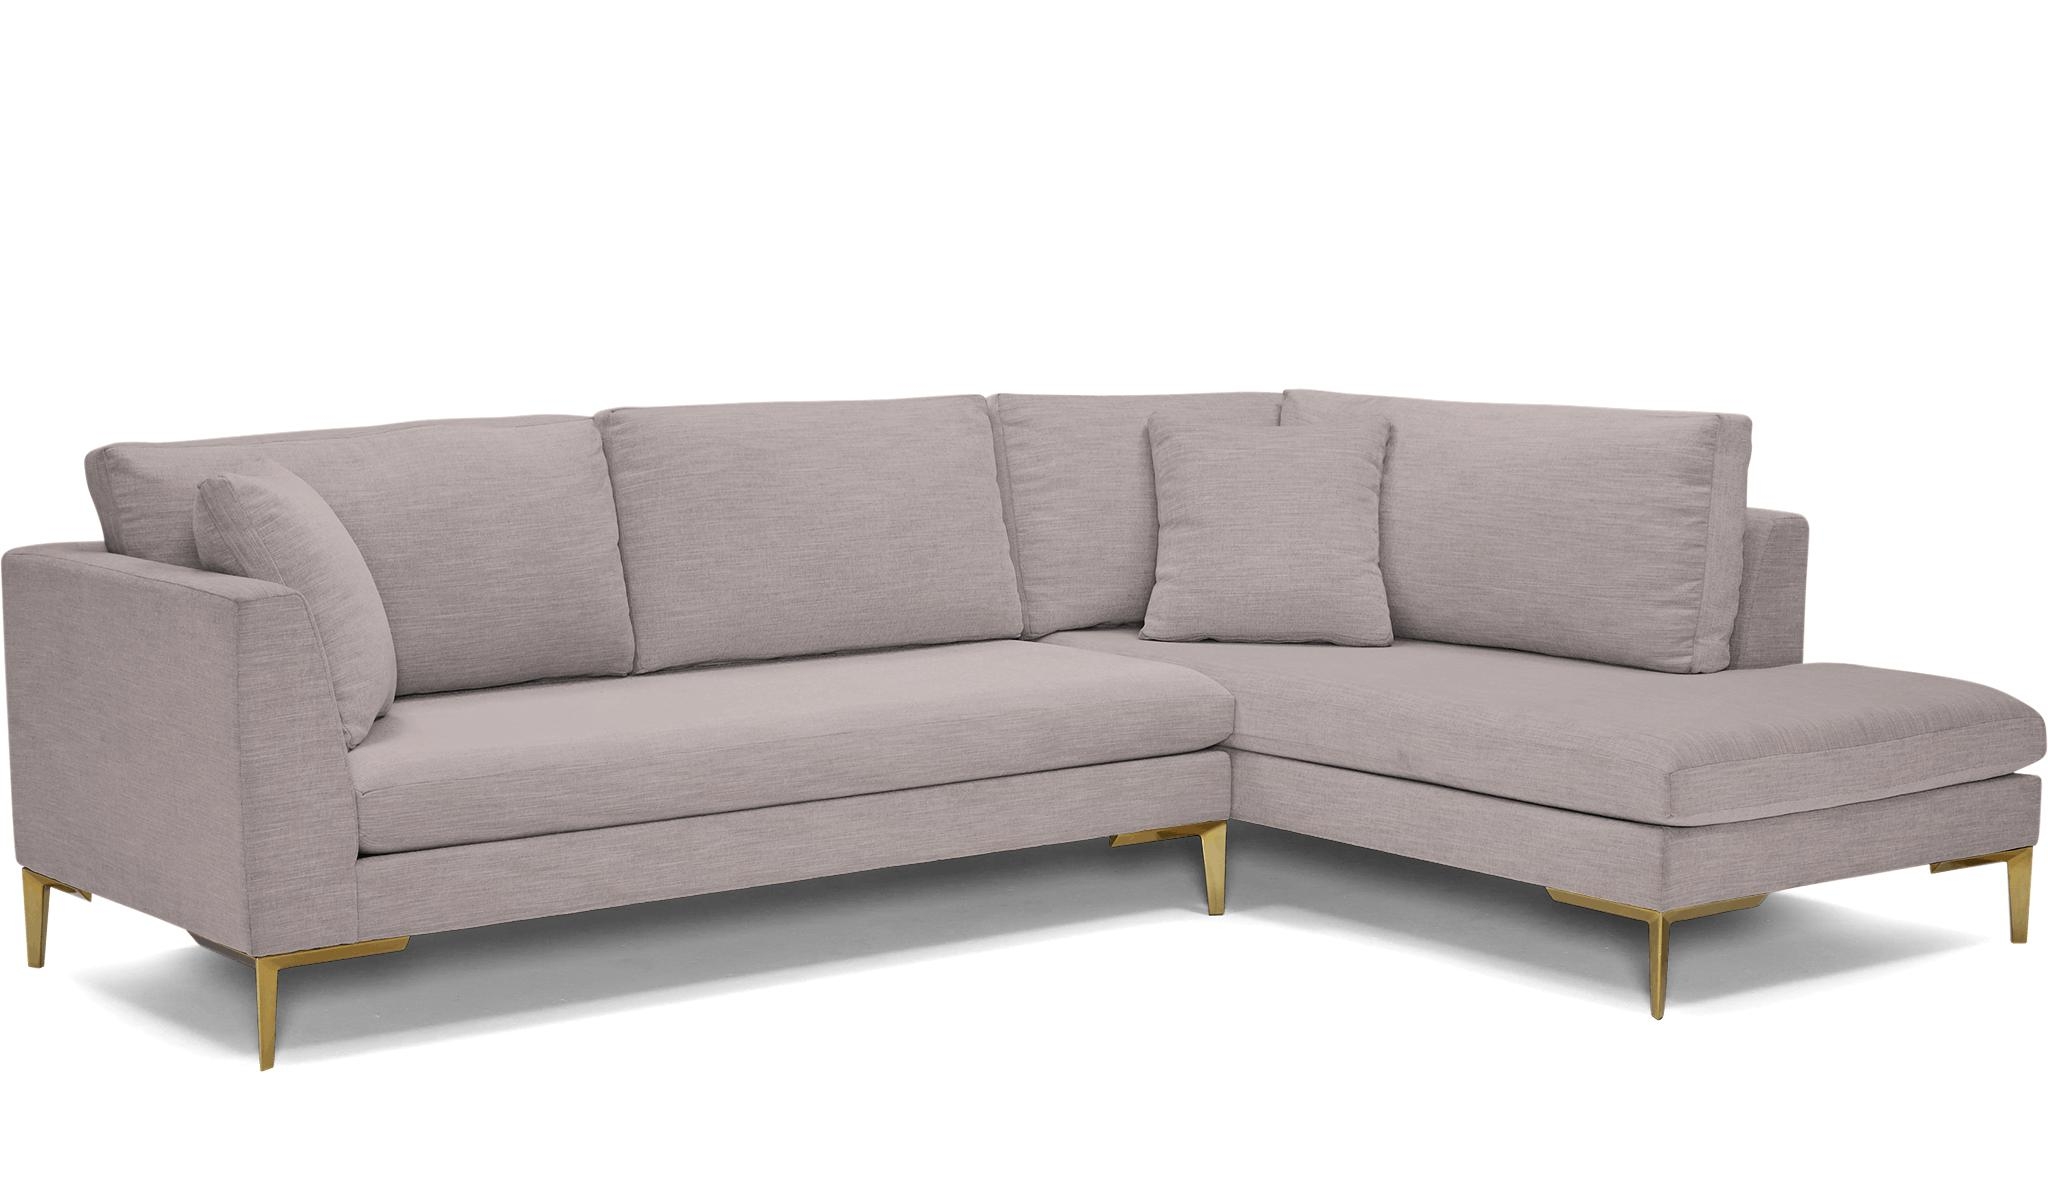 Purple Ainsley Mid Century Modern Sectional with Bumper - Sunbrella Premier Wisteria - Right  - Image 1